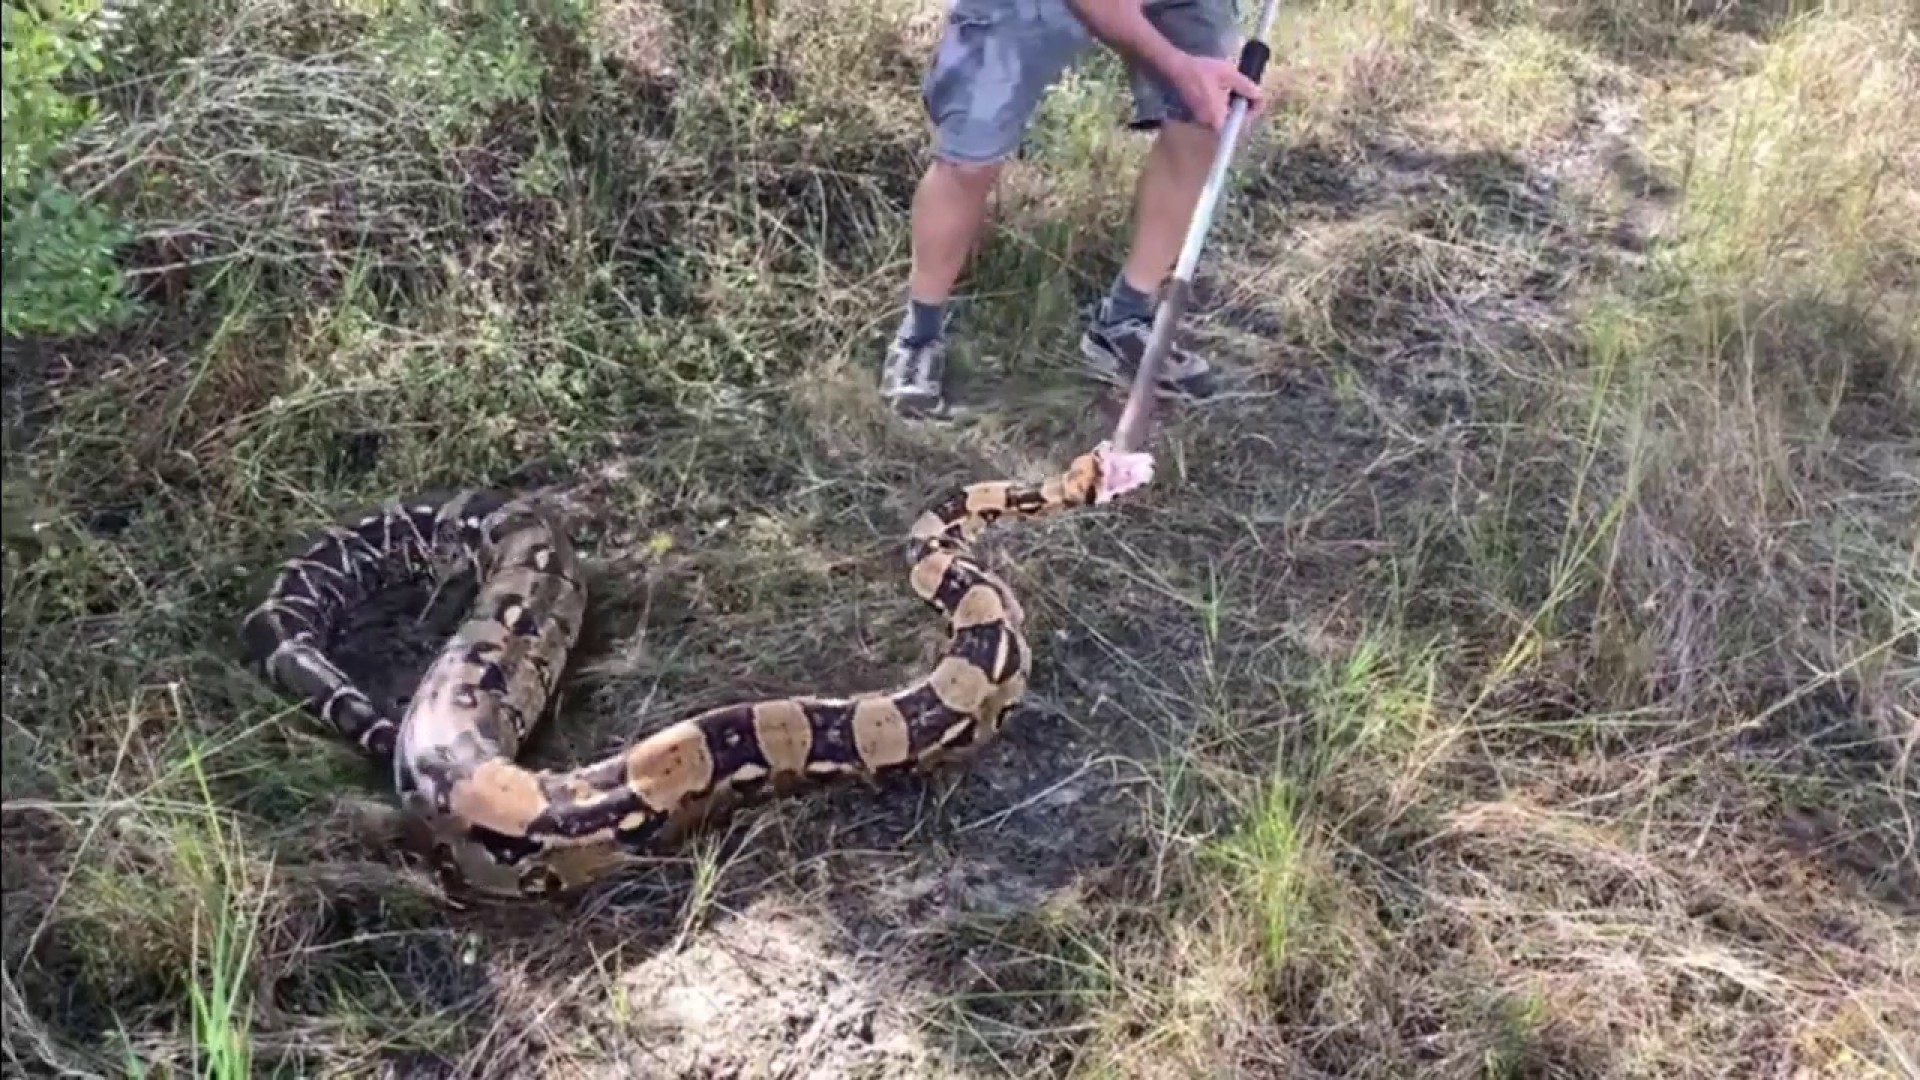 Florida Family Finds Massive Boa Constrictor While Walking Near Their Home